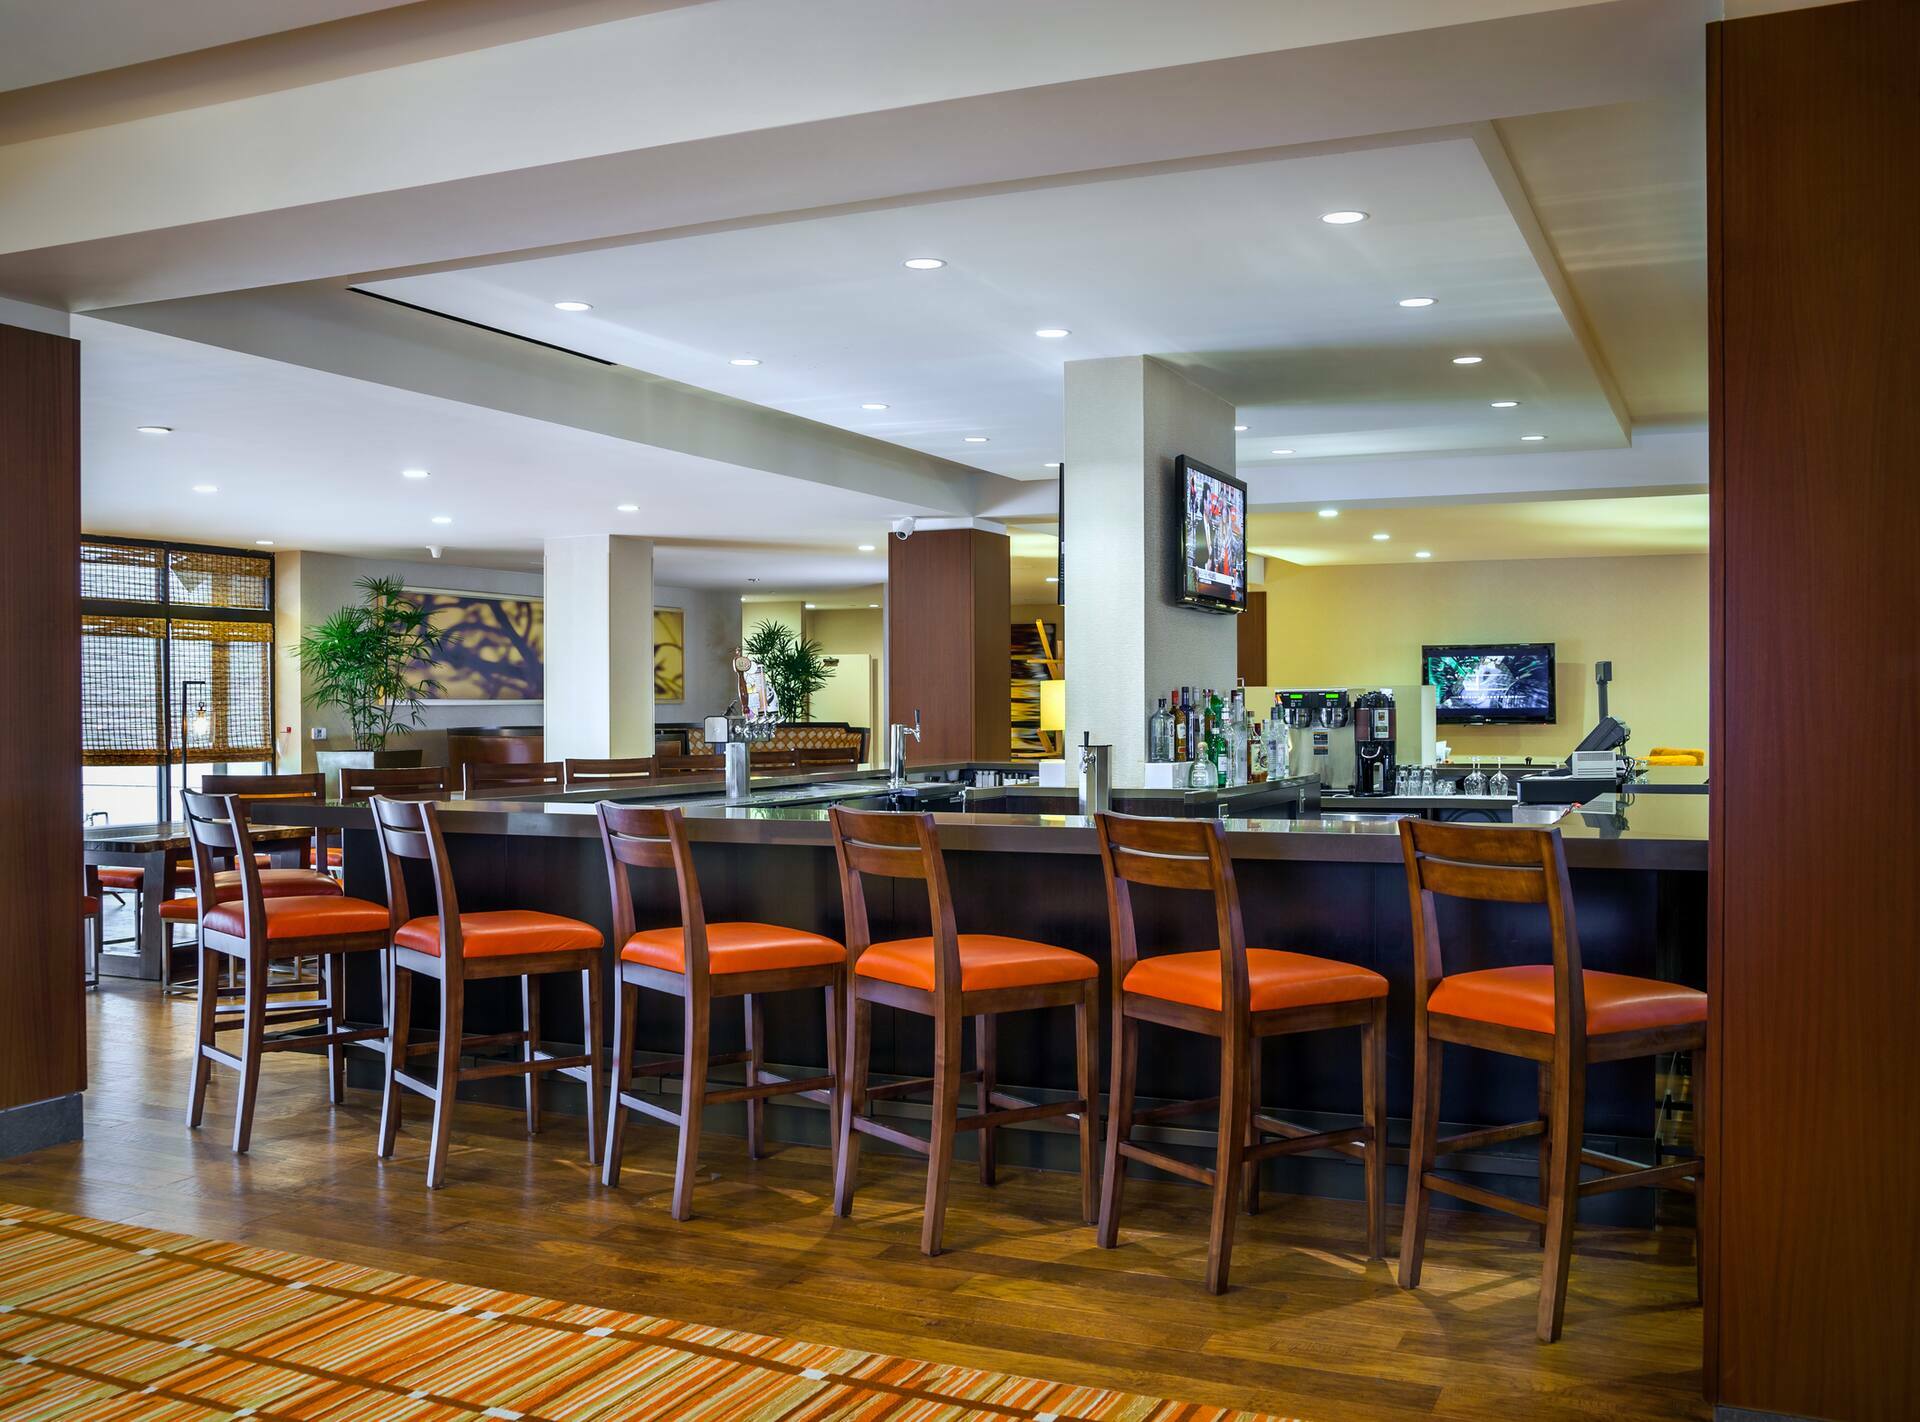 Photo of DoubleTree by Hilton Hotel San Francisco Airport, Burlingame, CA